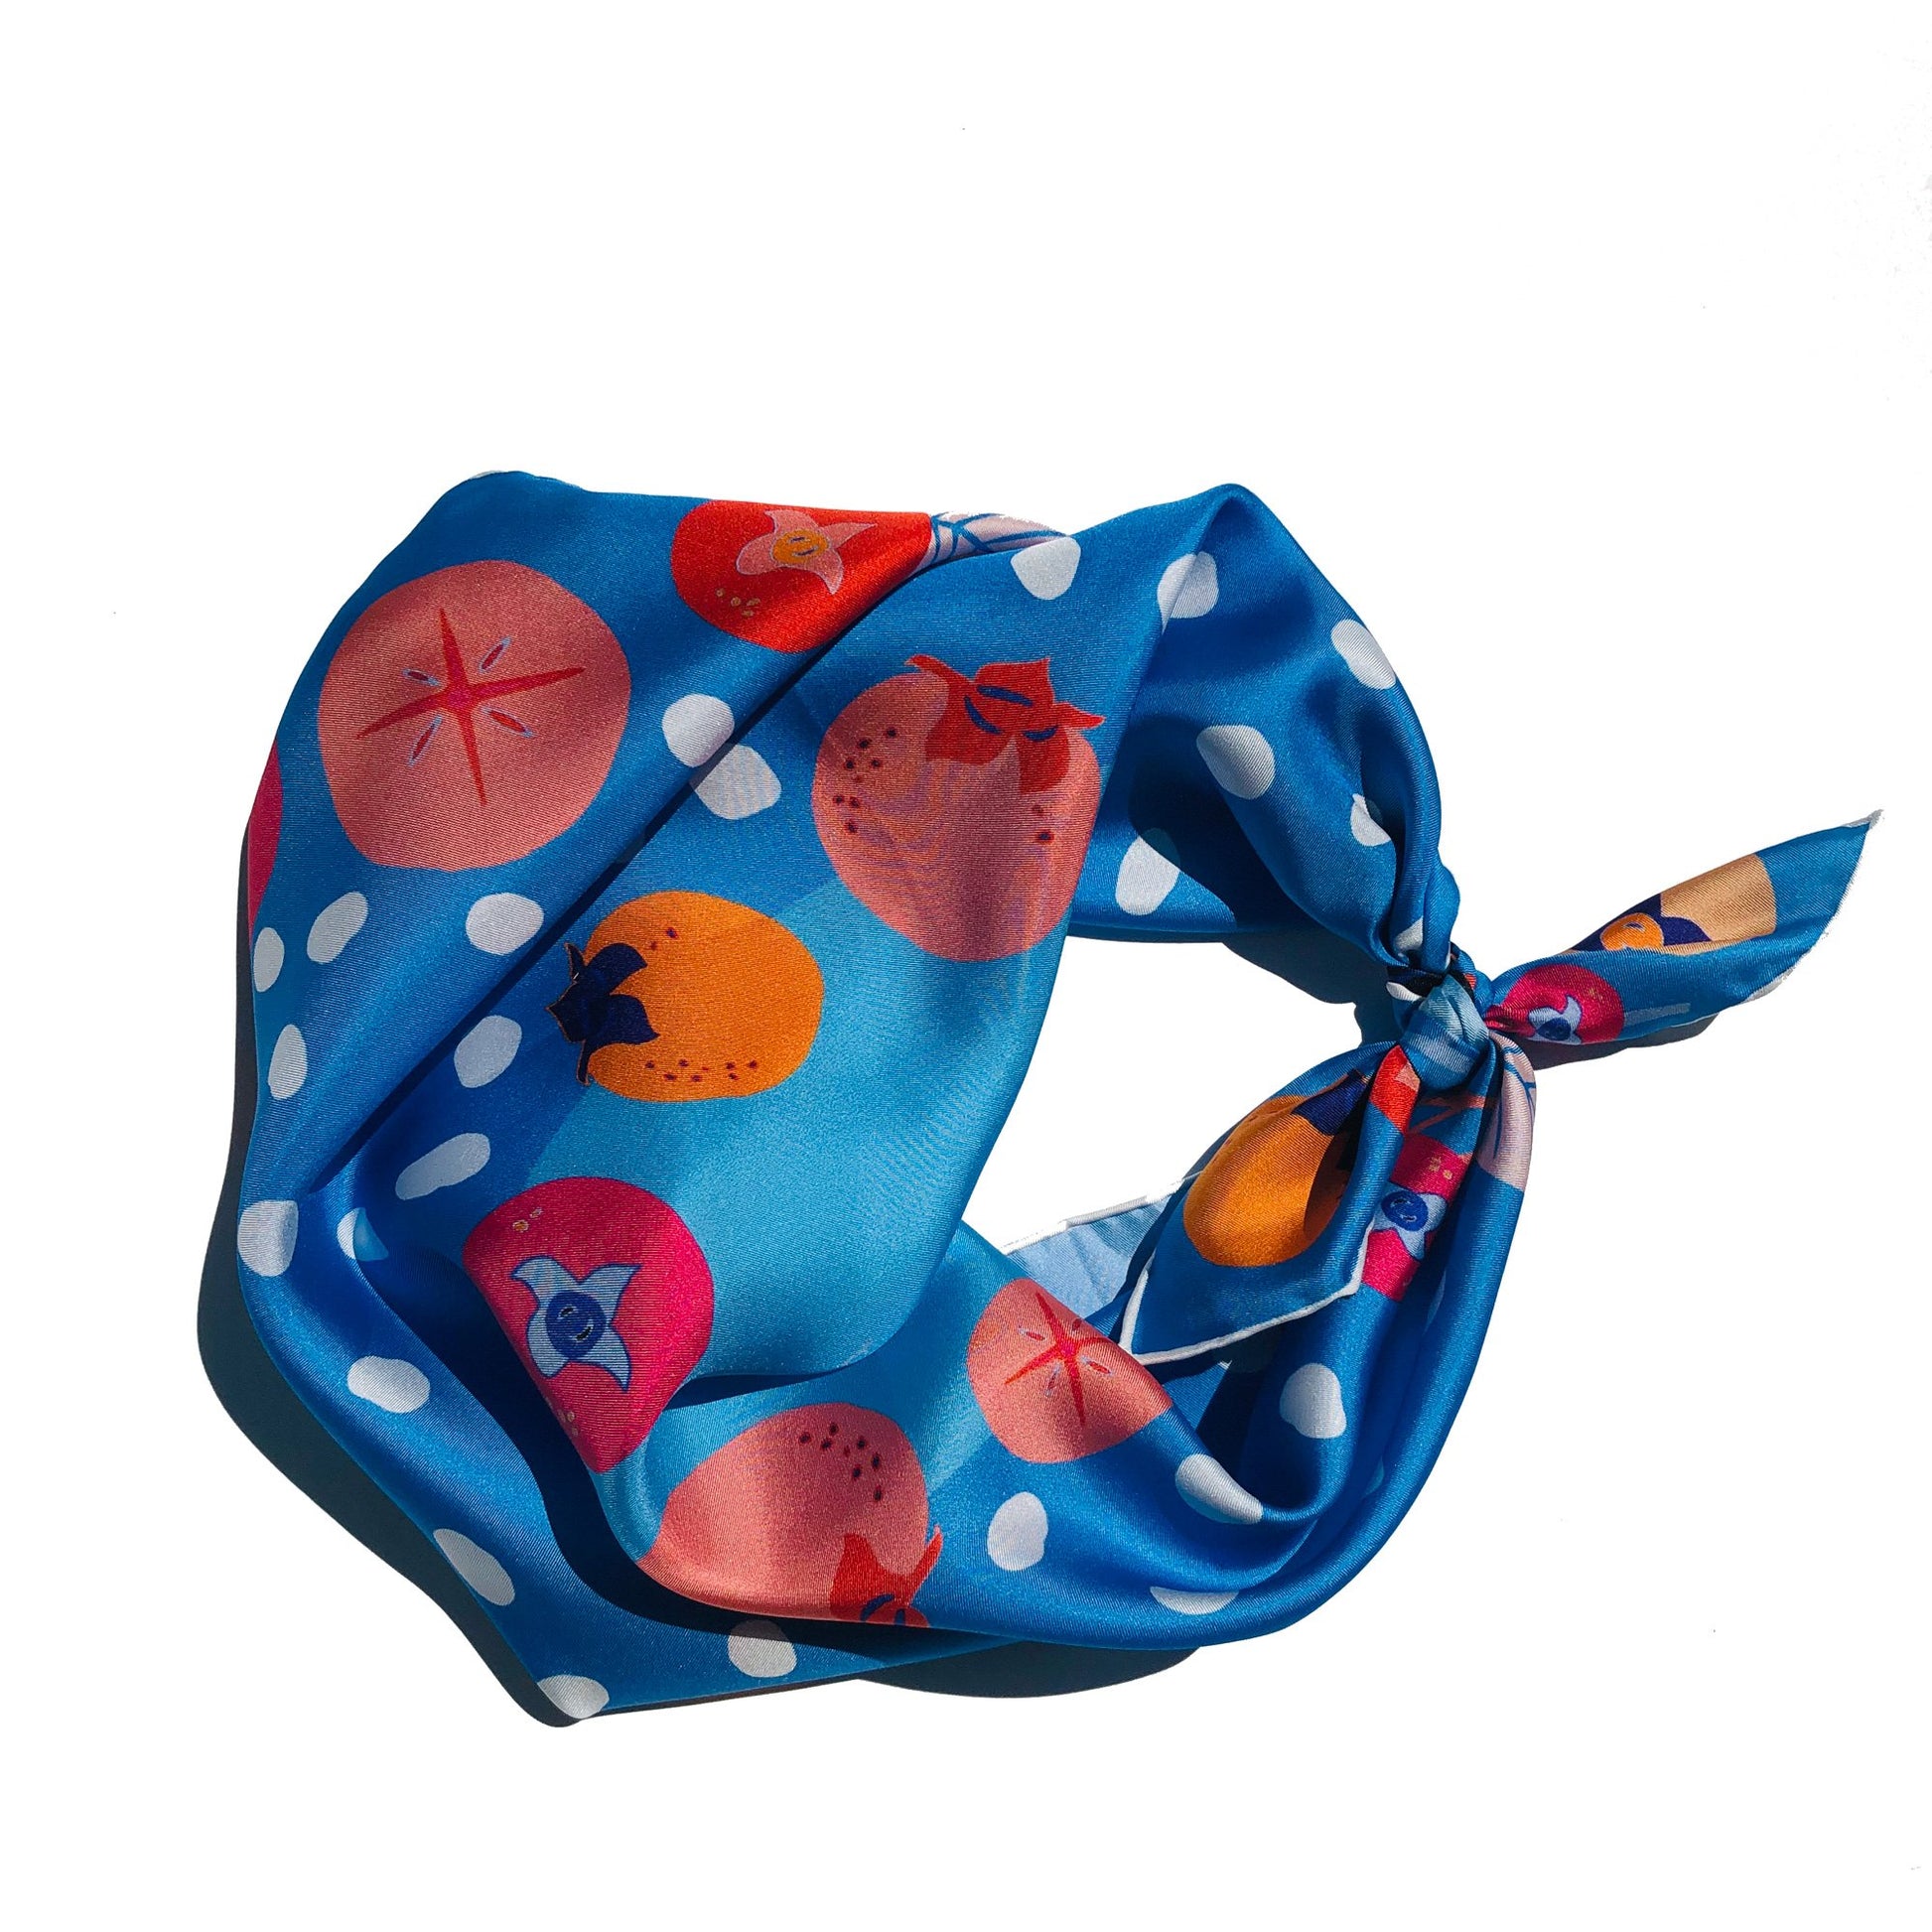 A blue tied silk bandana with persimmons and white polka dots.